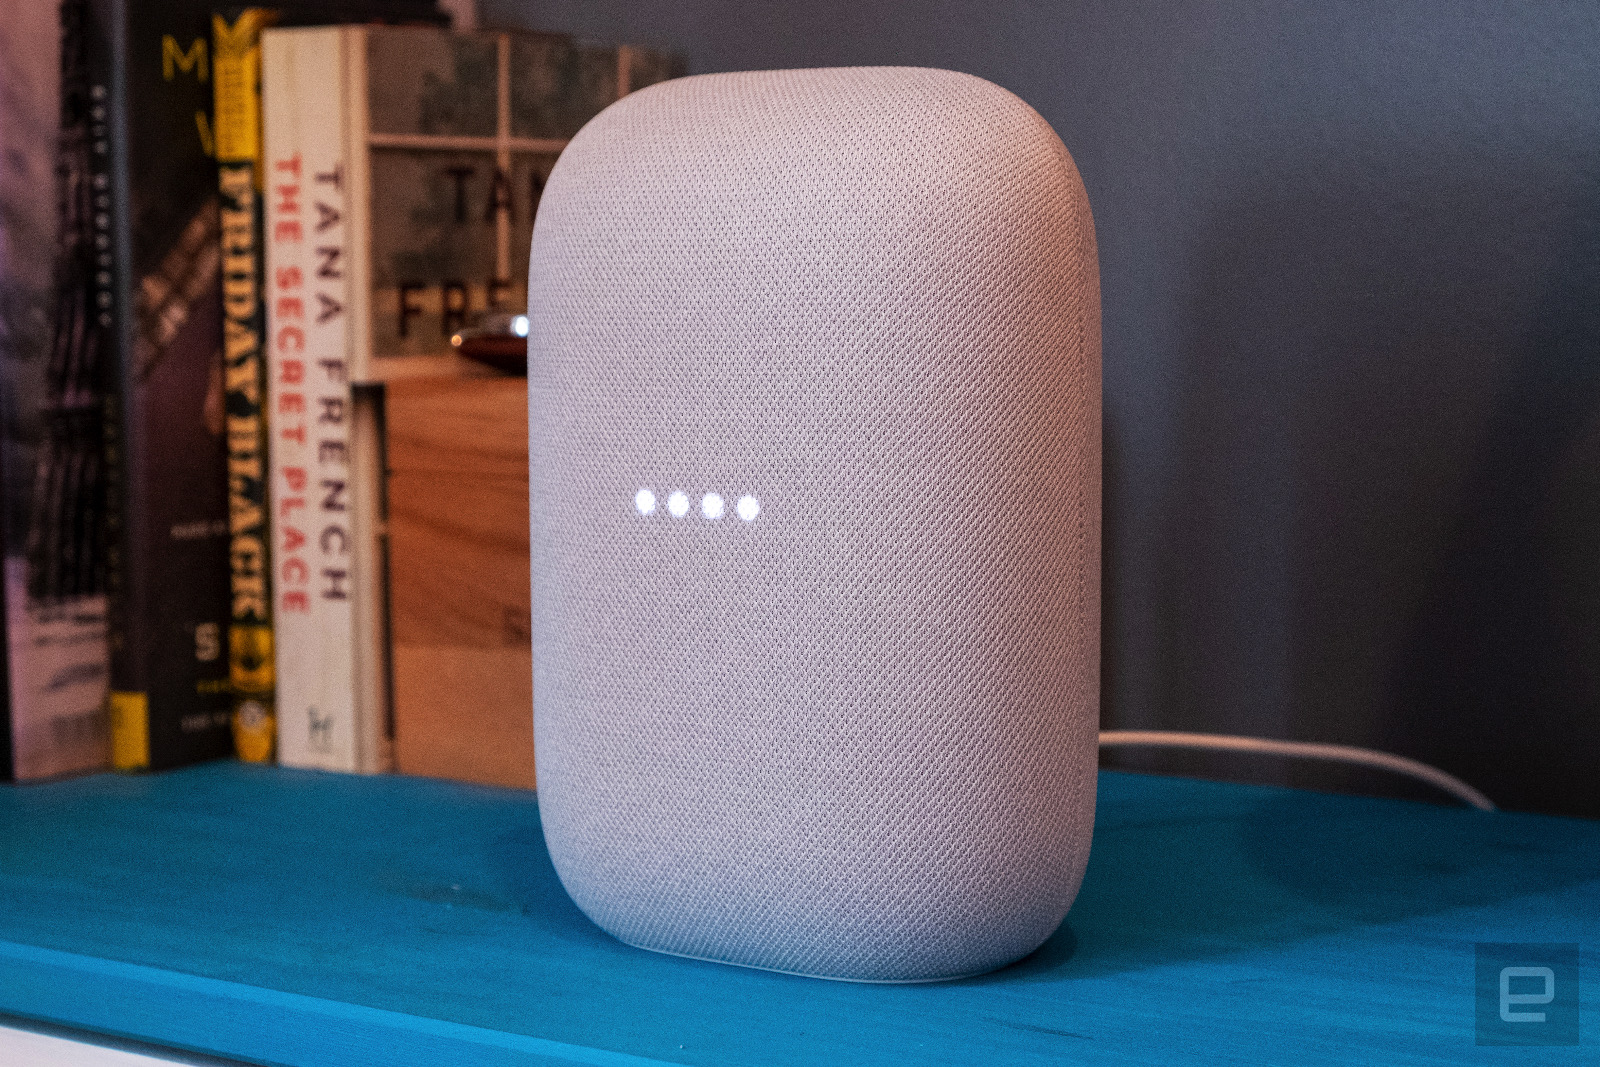 Google Home can now use Nest speakers to detect your presence